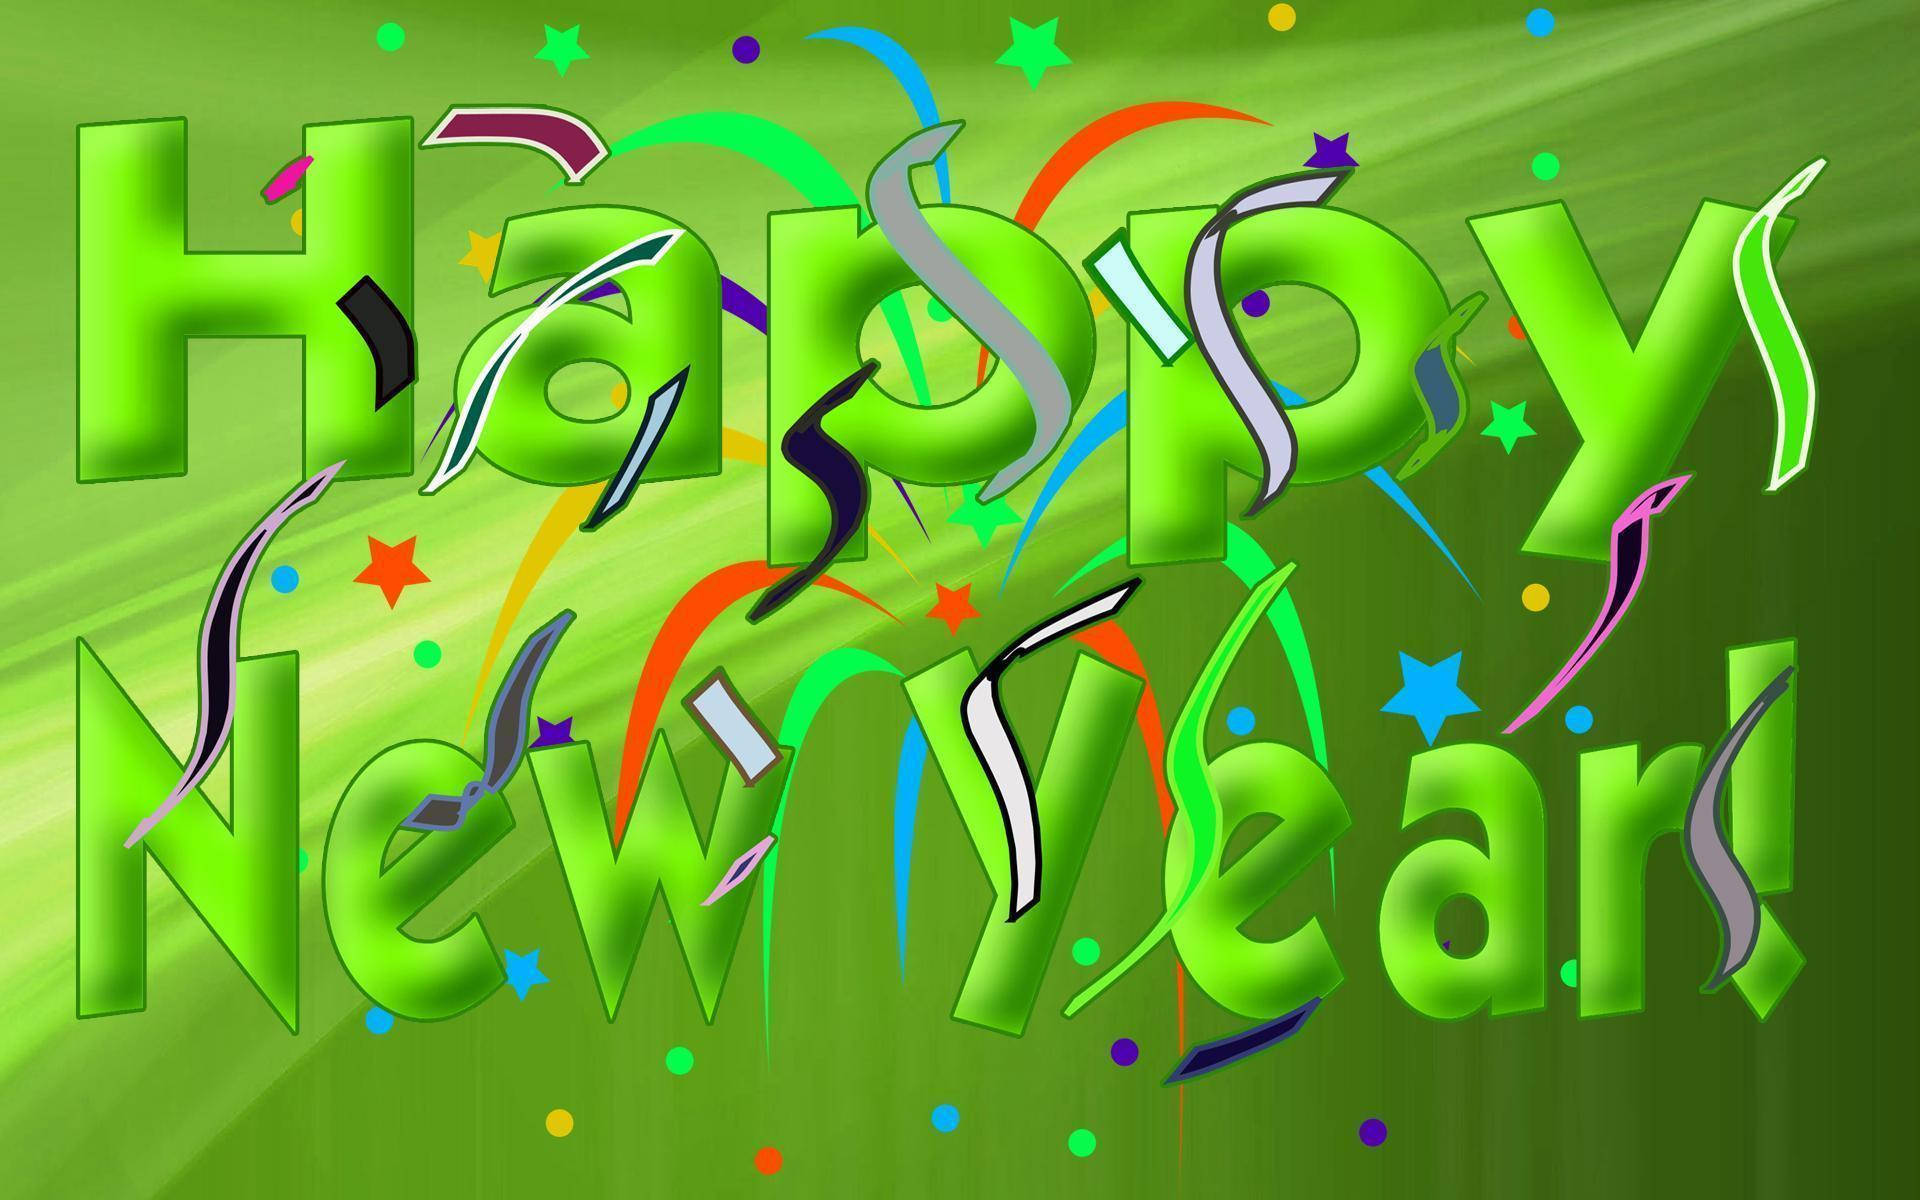 Green Happy New Year 2021 Greeting Wallpaper